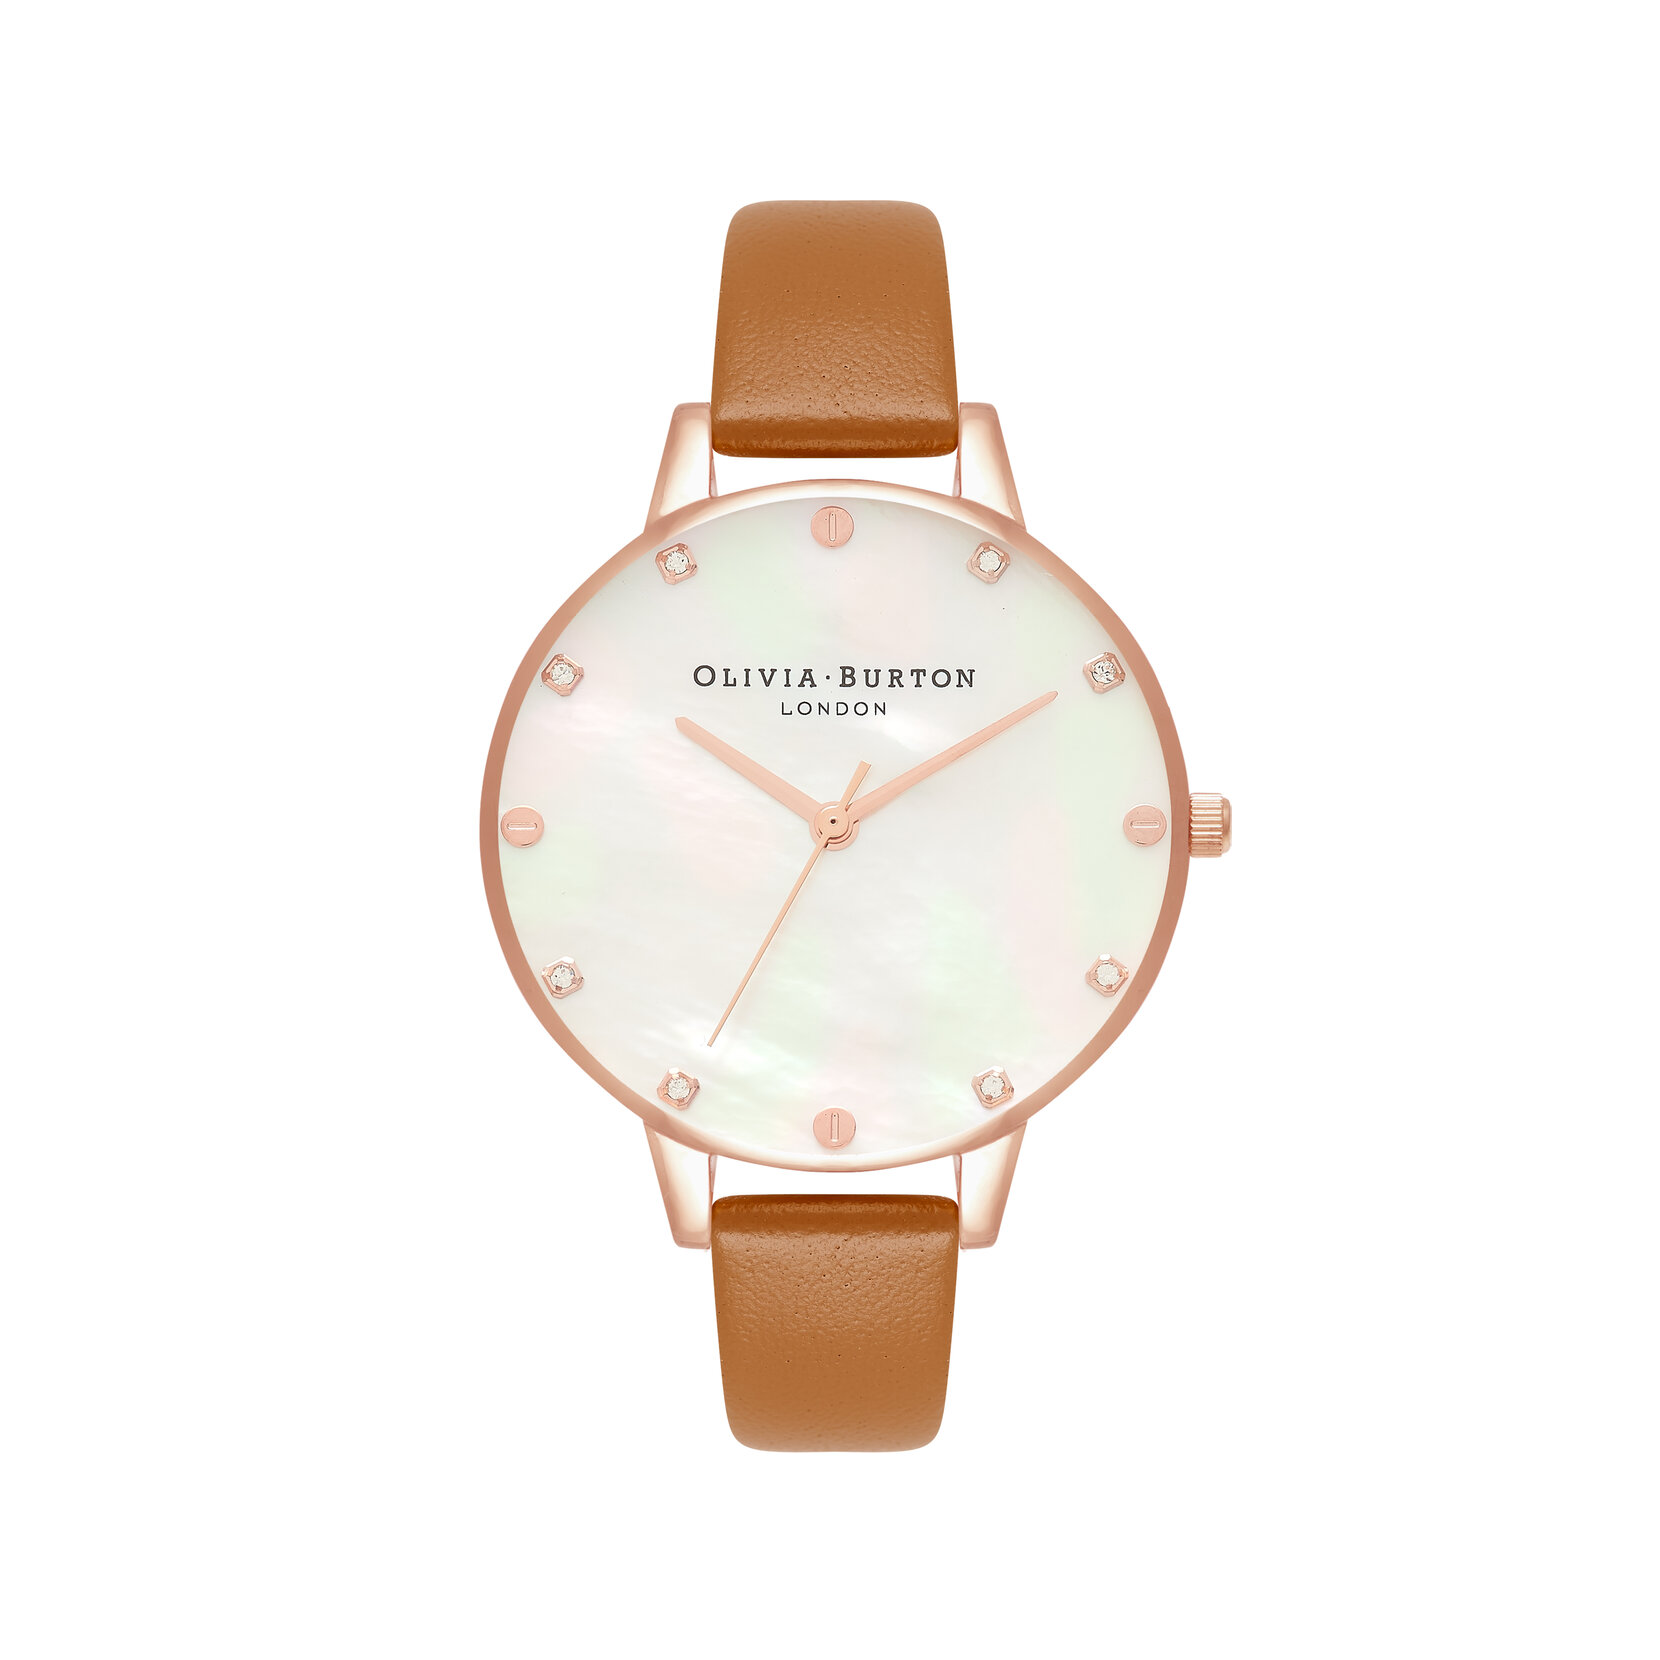 34mm Rose Gold & Tan Leather Strap Watch